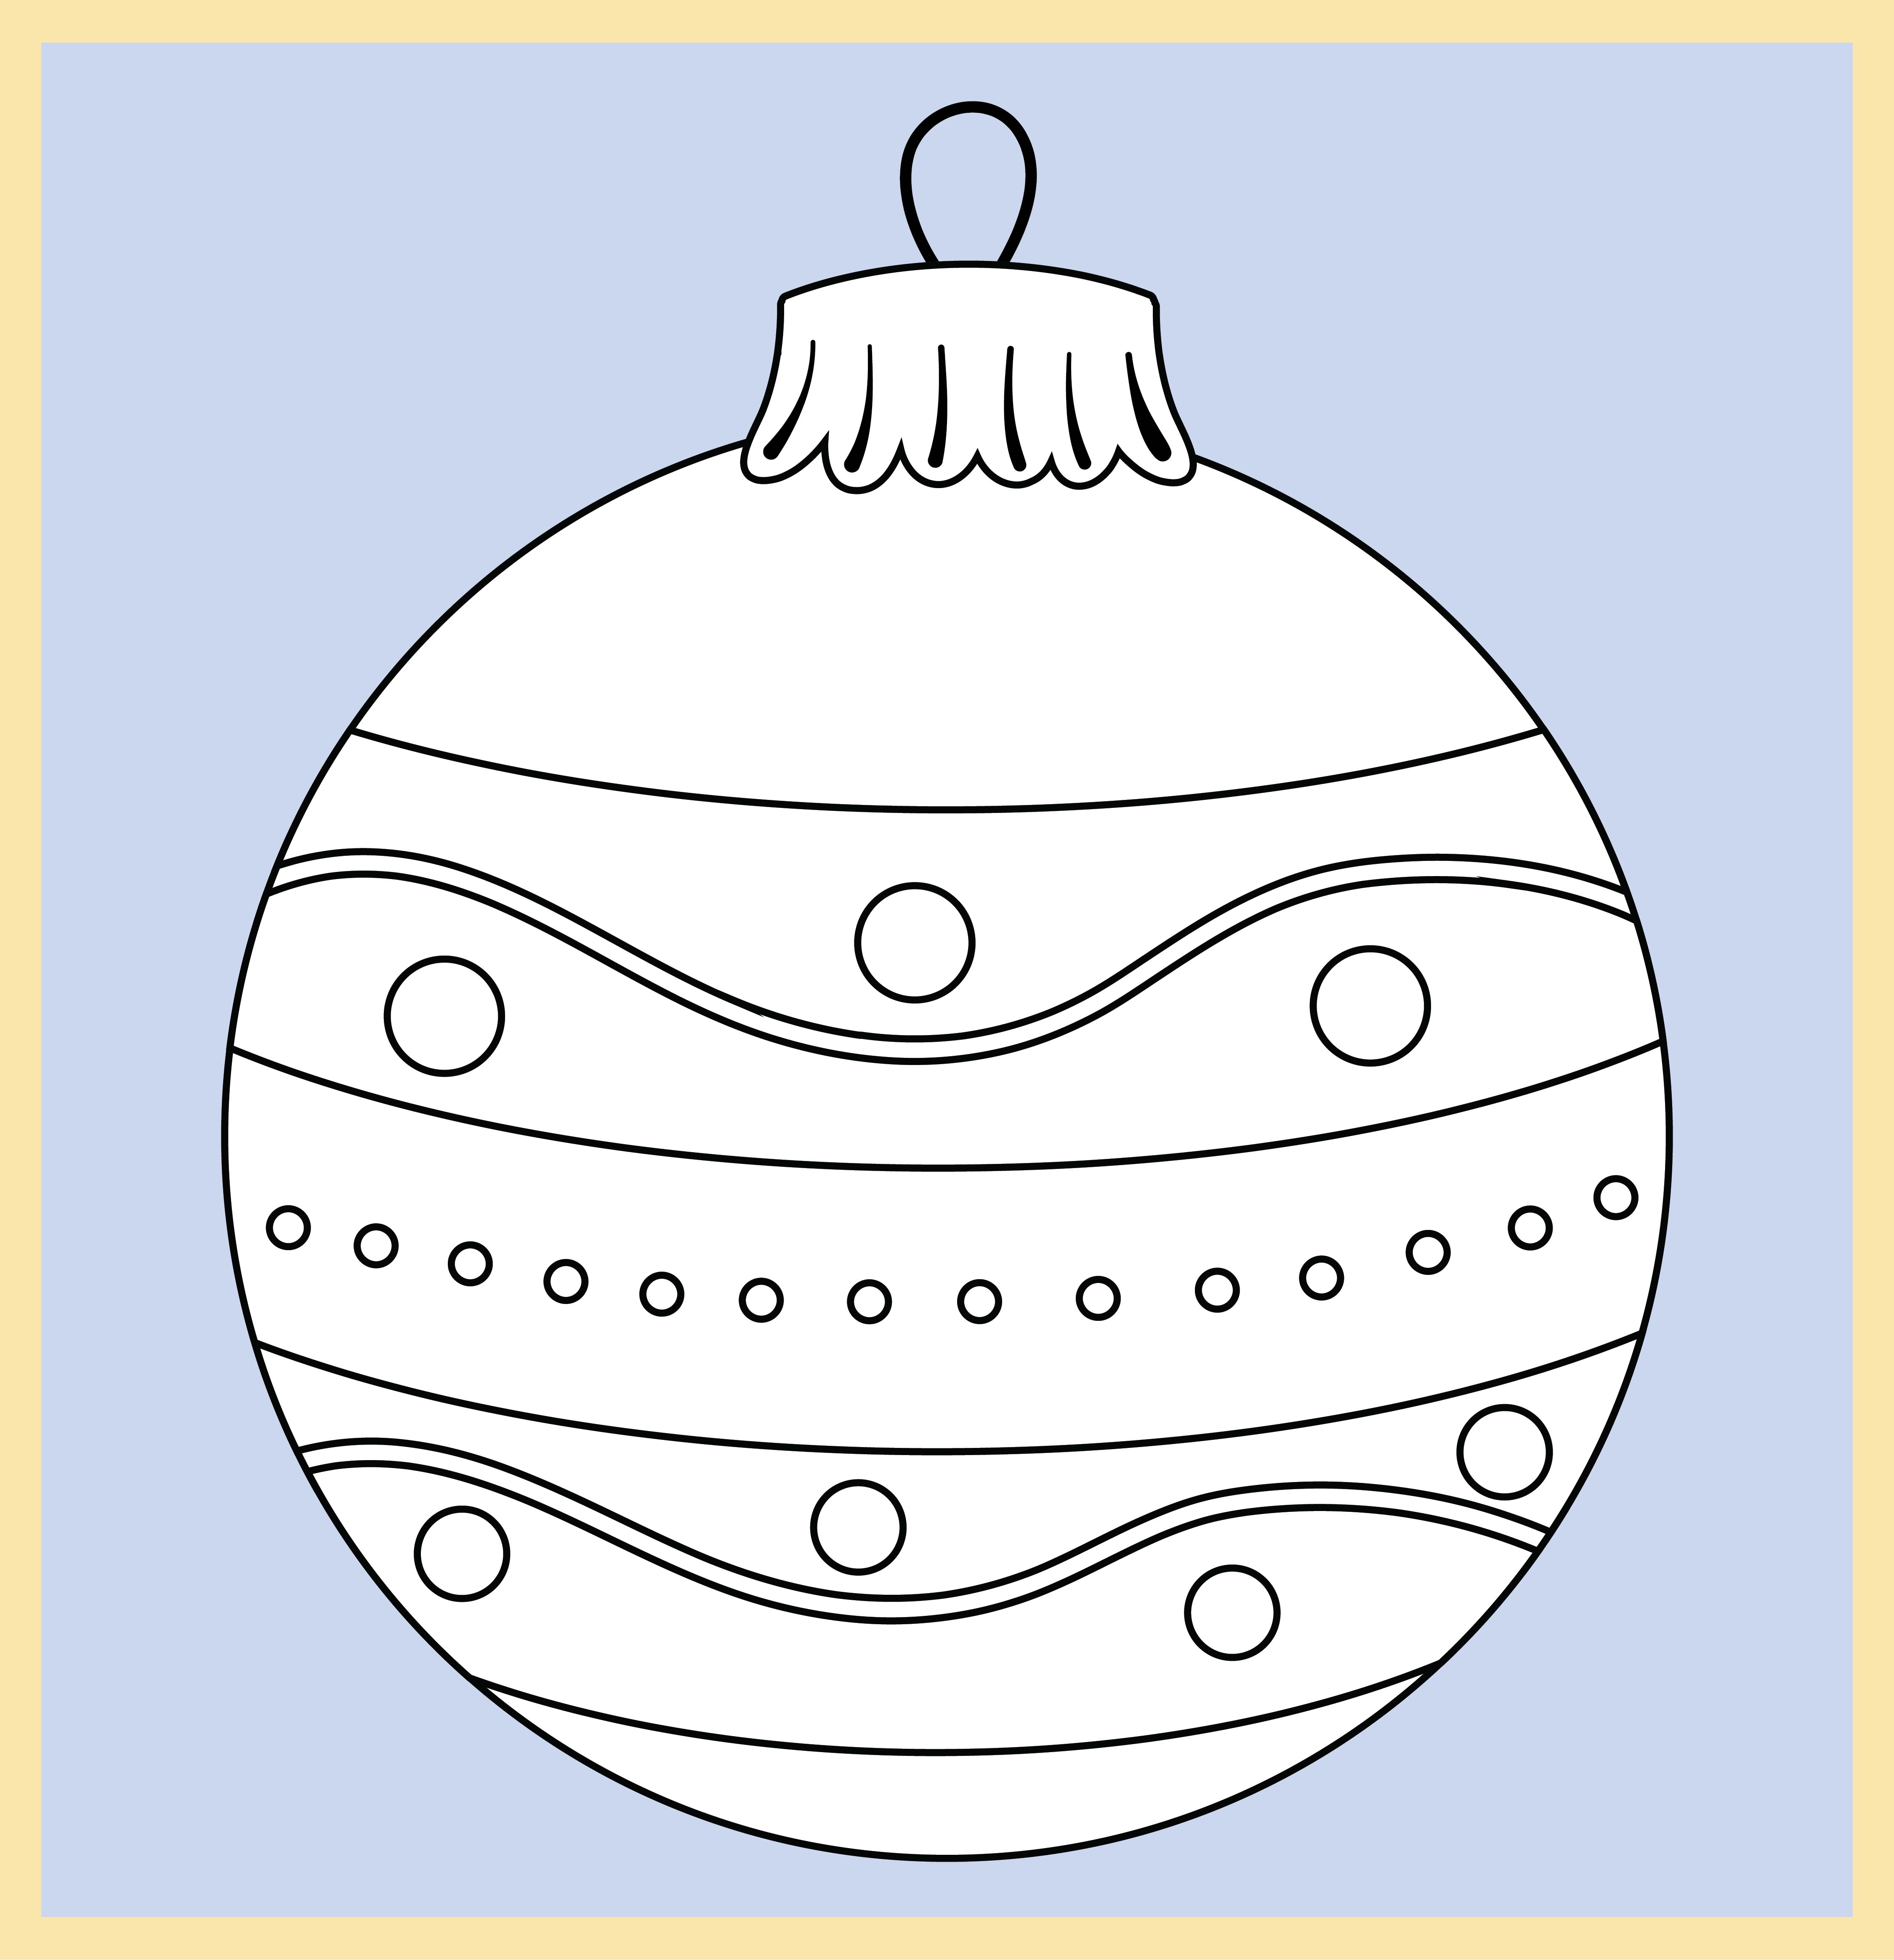 Template Free Printable Christmas Ornament Patterns